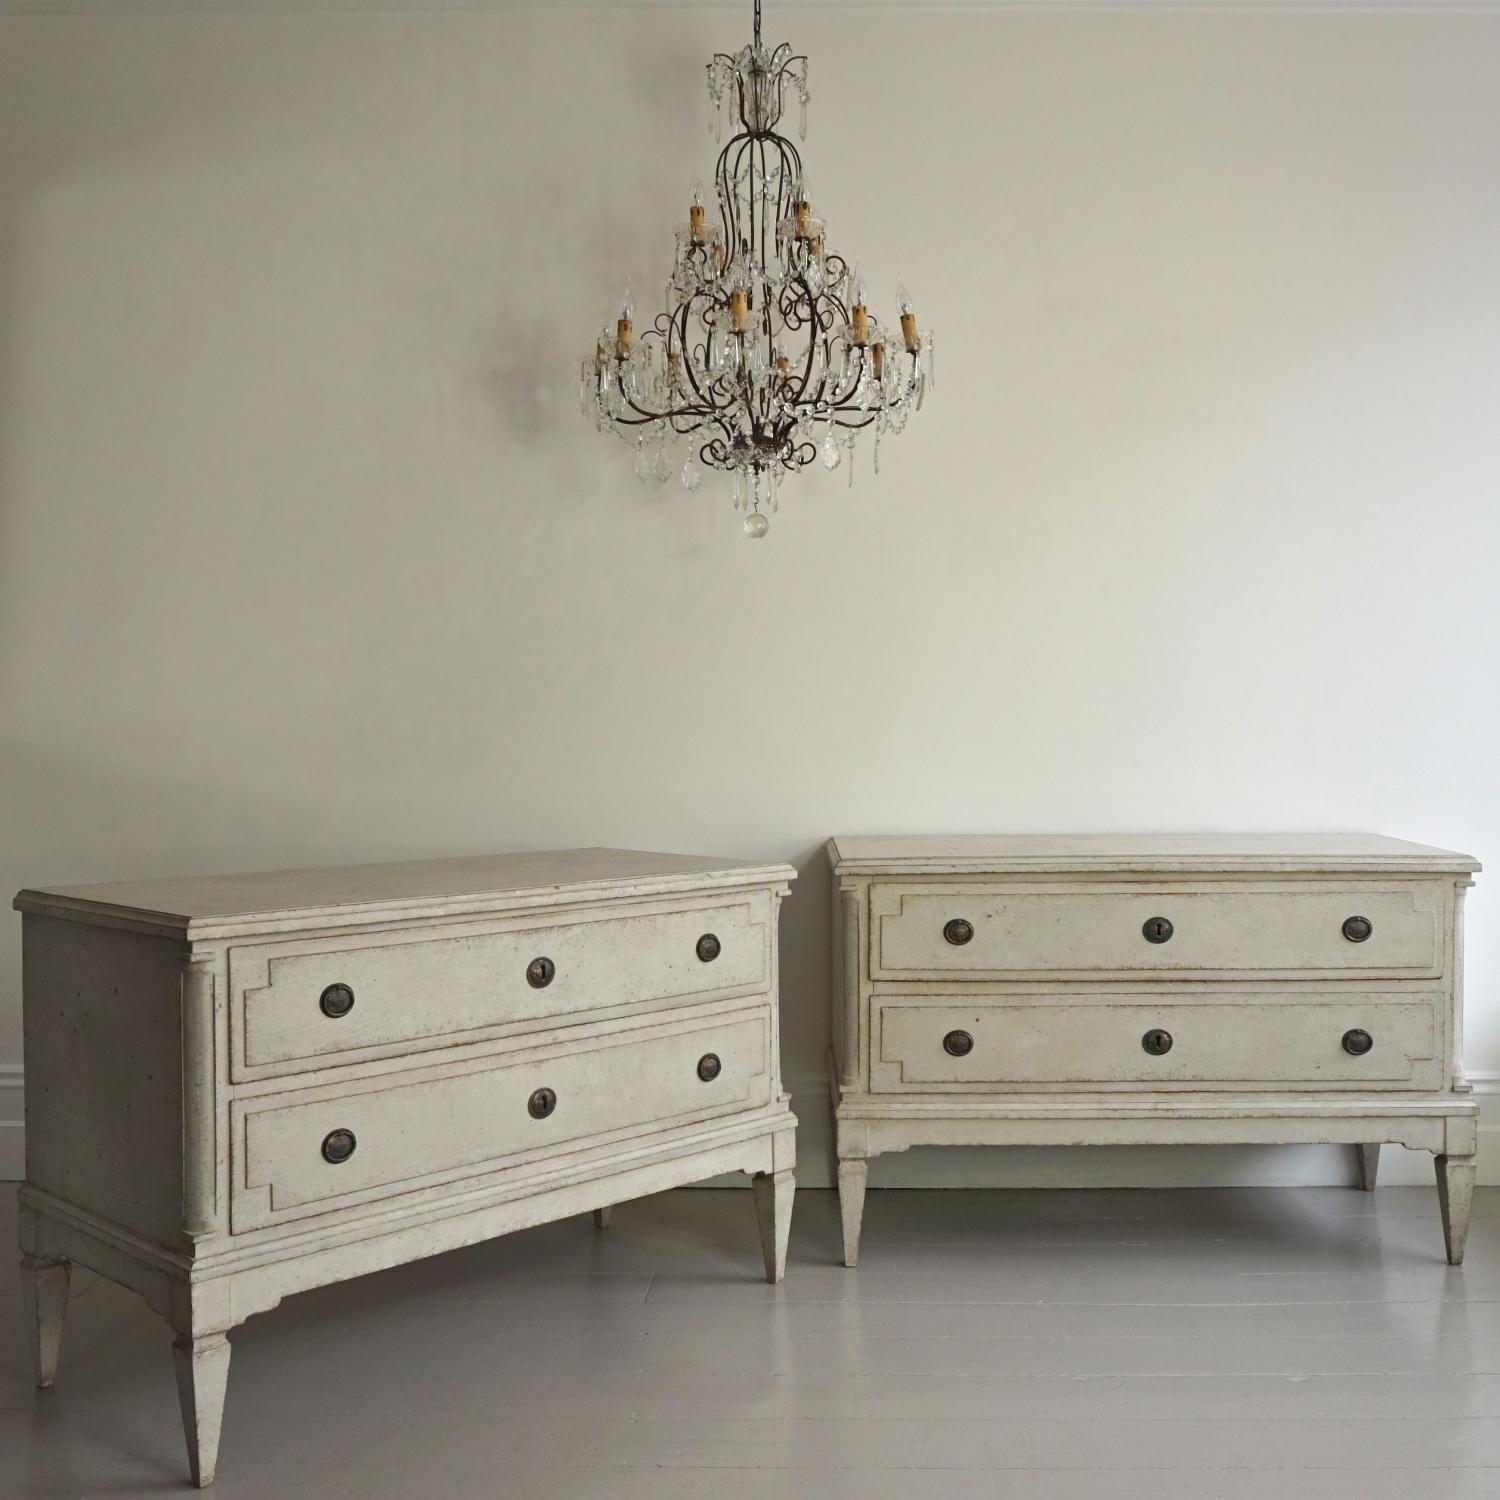 PAIR OF LARGE PERIOD GUSTAVIAN CHESTS